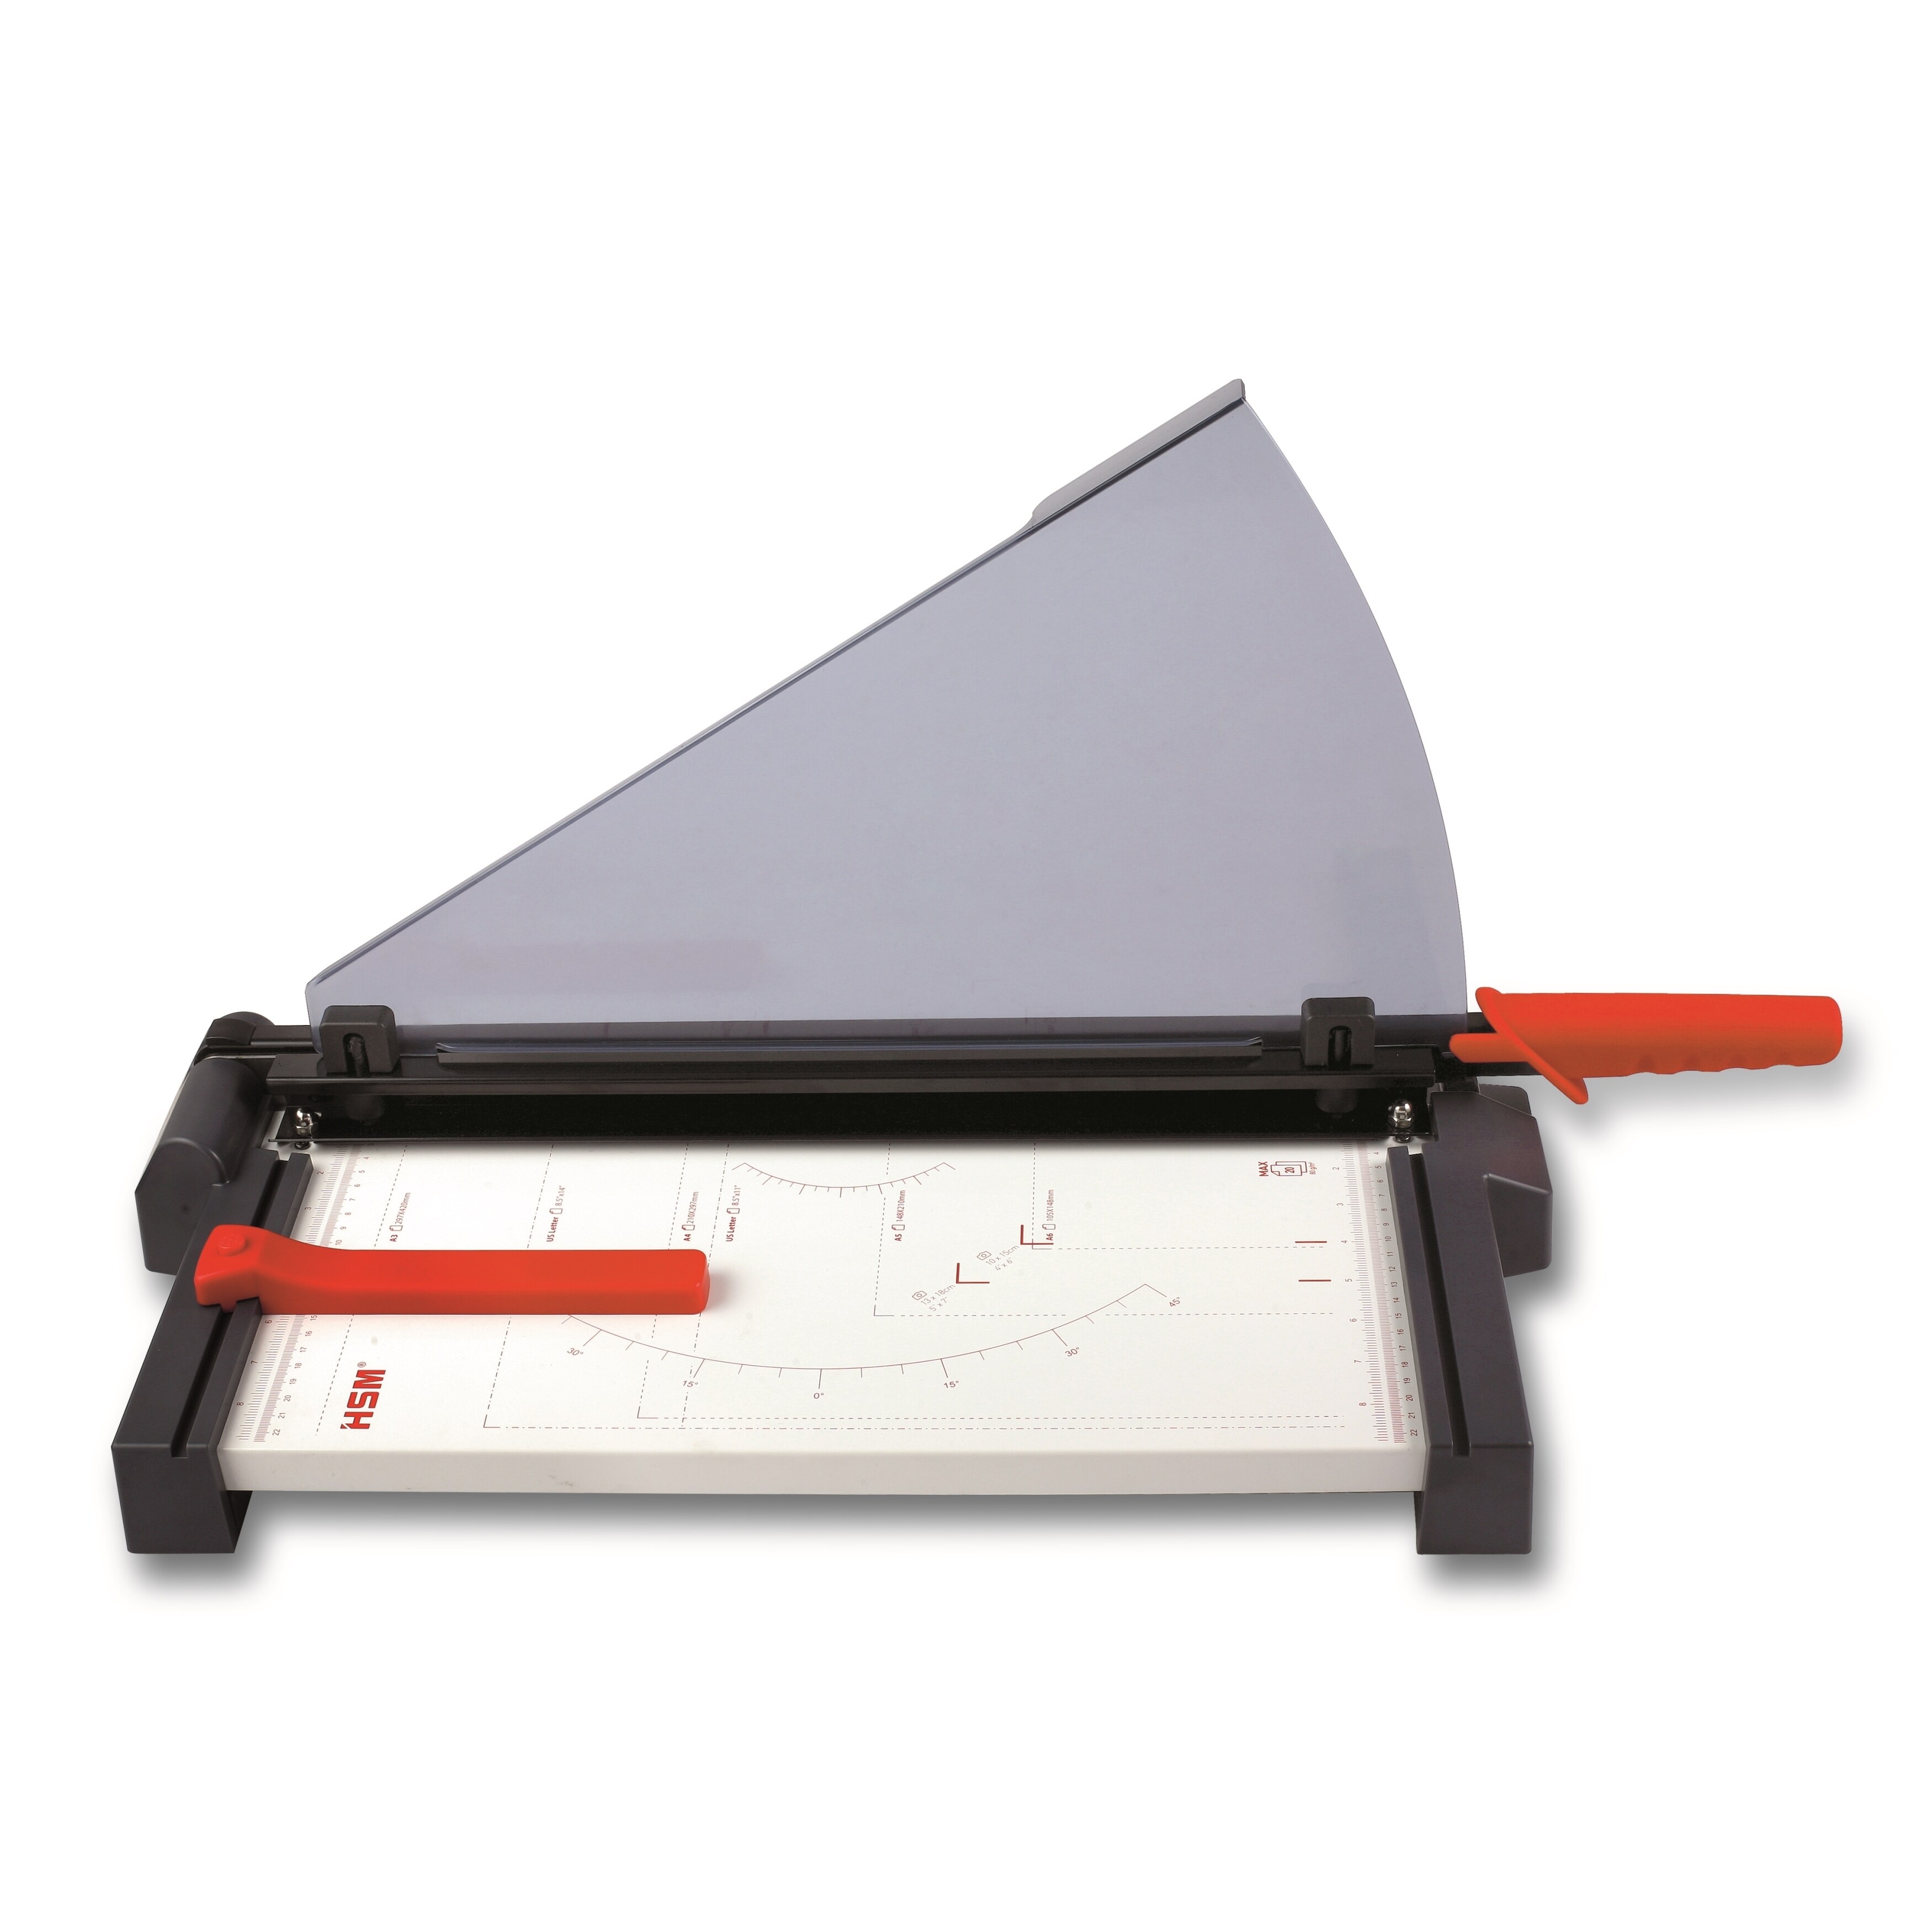 Hsm Cutline G series G4620 Guillotine Paper Cutter (BlackMaterials Steel, plasticQuantity One (1) paper cutterSetting IndoorDimensions 4.8 inches high x 29 inches wide x 14.25 inches deep )